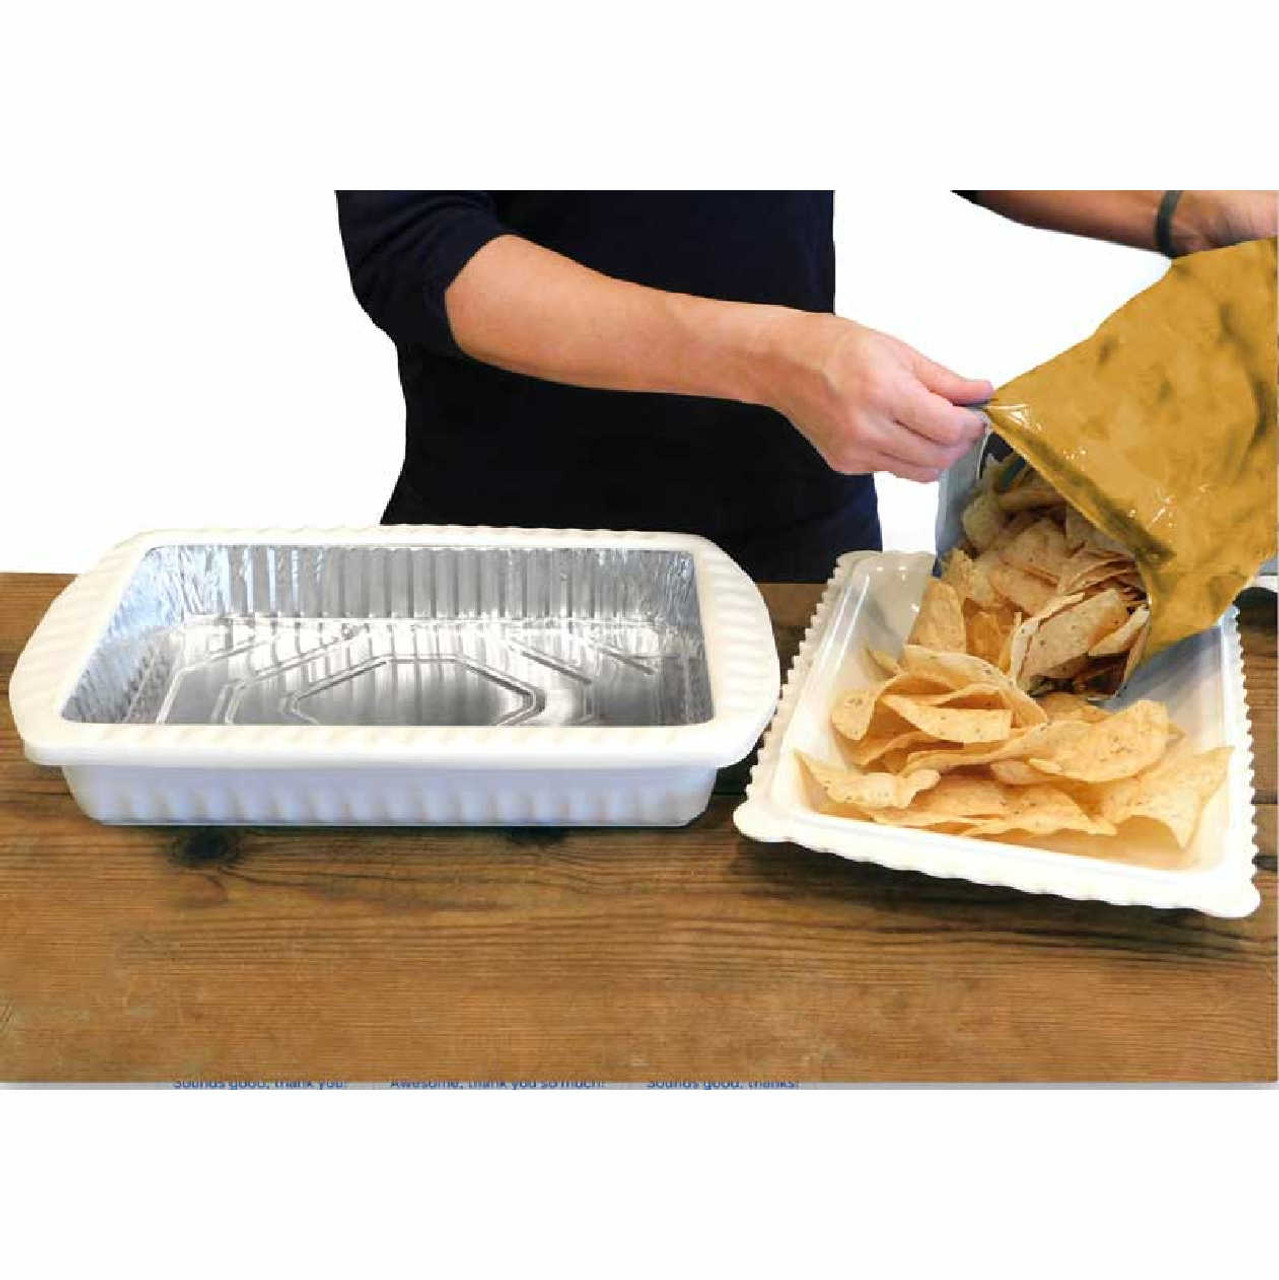  Foil Decor Serving and Casserole Carrier for 9x13 Foil Pans,  Heat Resistant w/Handles, Lid Locks in Place for Safe and Easy Carrying, Lid  Doubles as a Serving Dish, 2 Aluminum Pans